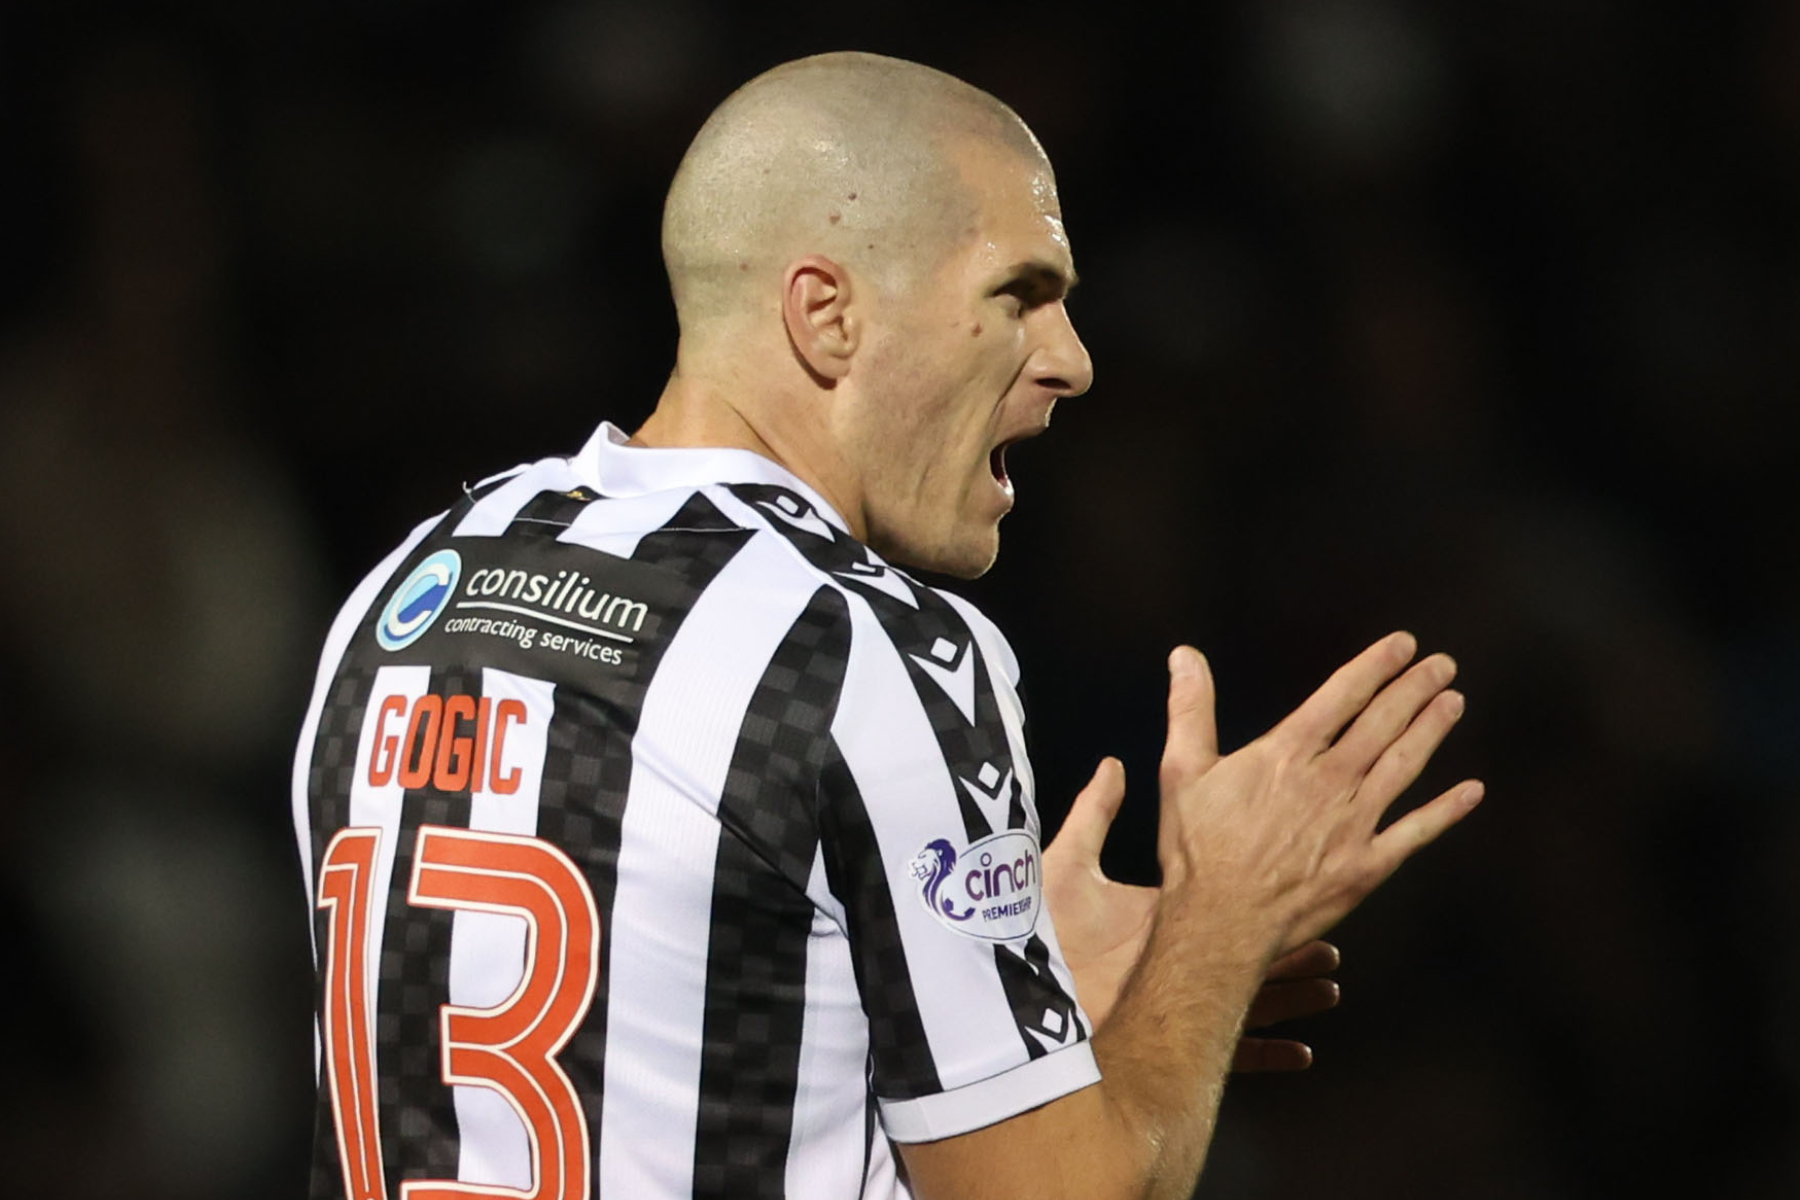 St Mirren must tie down Gogic on new contract but it could be tough